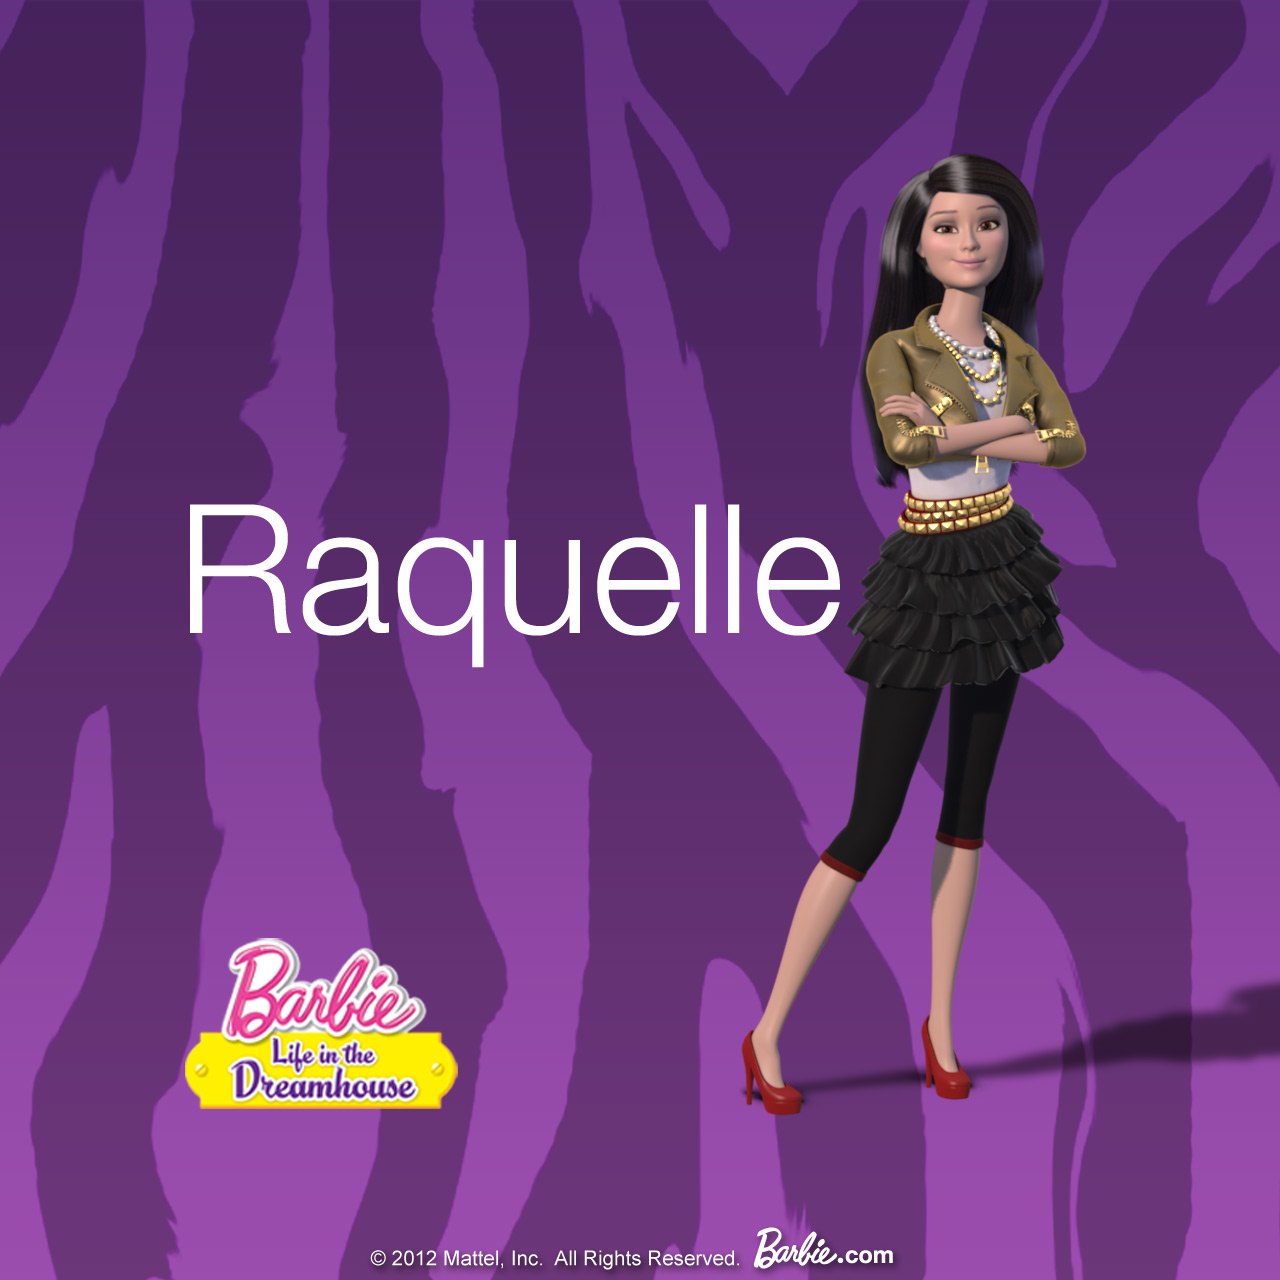 How Old Is Raquelle From Barbie Life In The Dreamhouse The series is